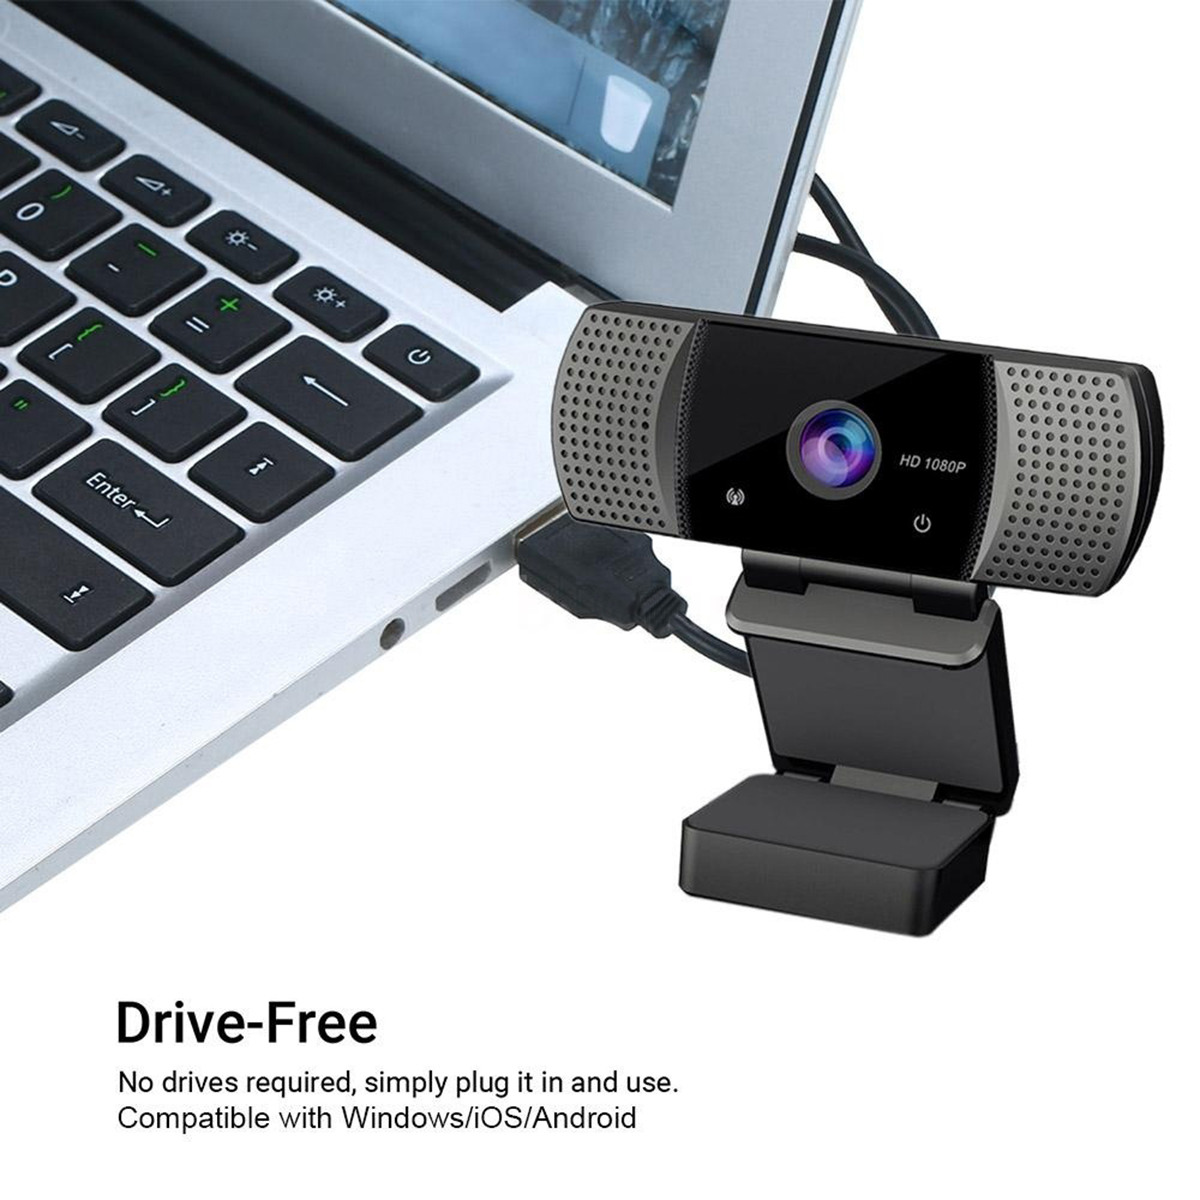 1080P-USB-Webcams-PC-Laptop-Video-Computer-Camera-Built-in-Microphone-Drive-Free-1771465-3